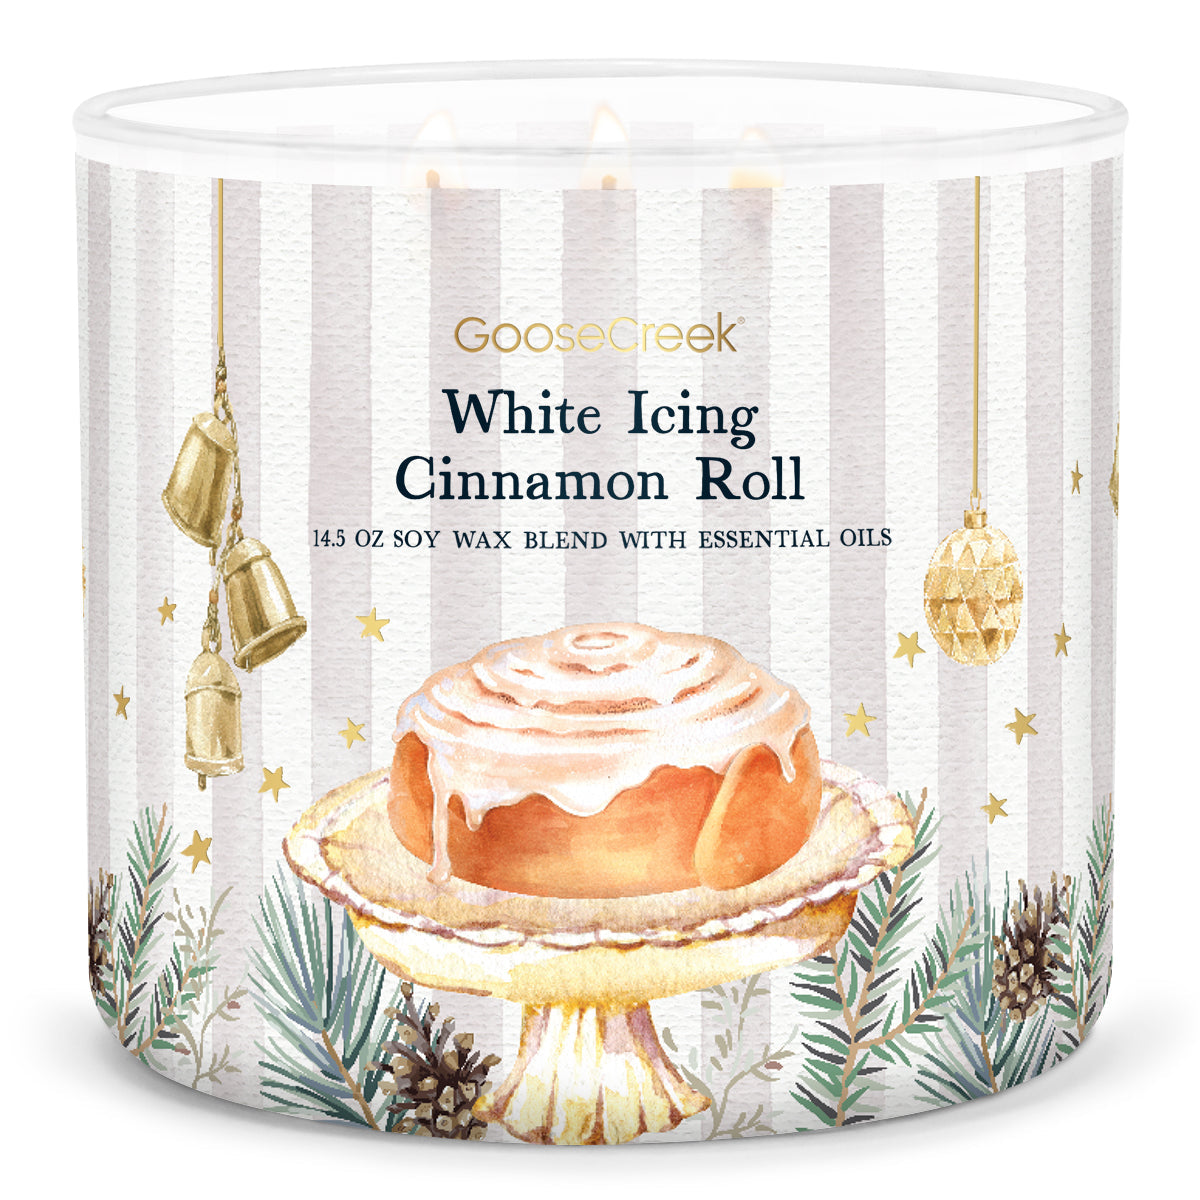 White Icing Cinnamon Roll Large 3-Wick Candle